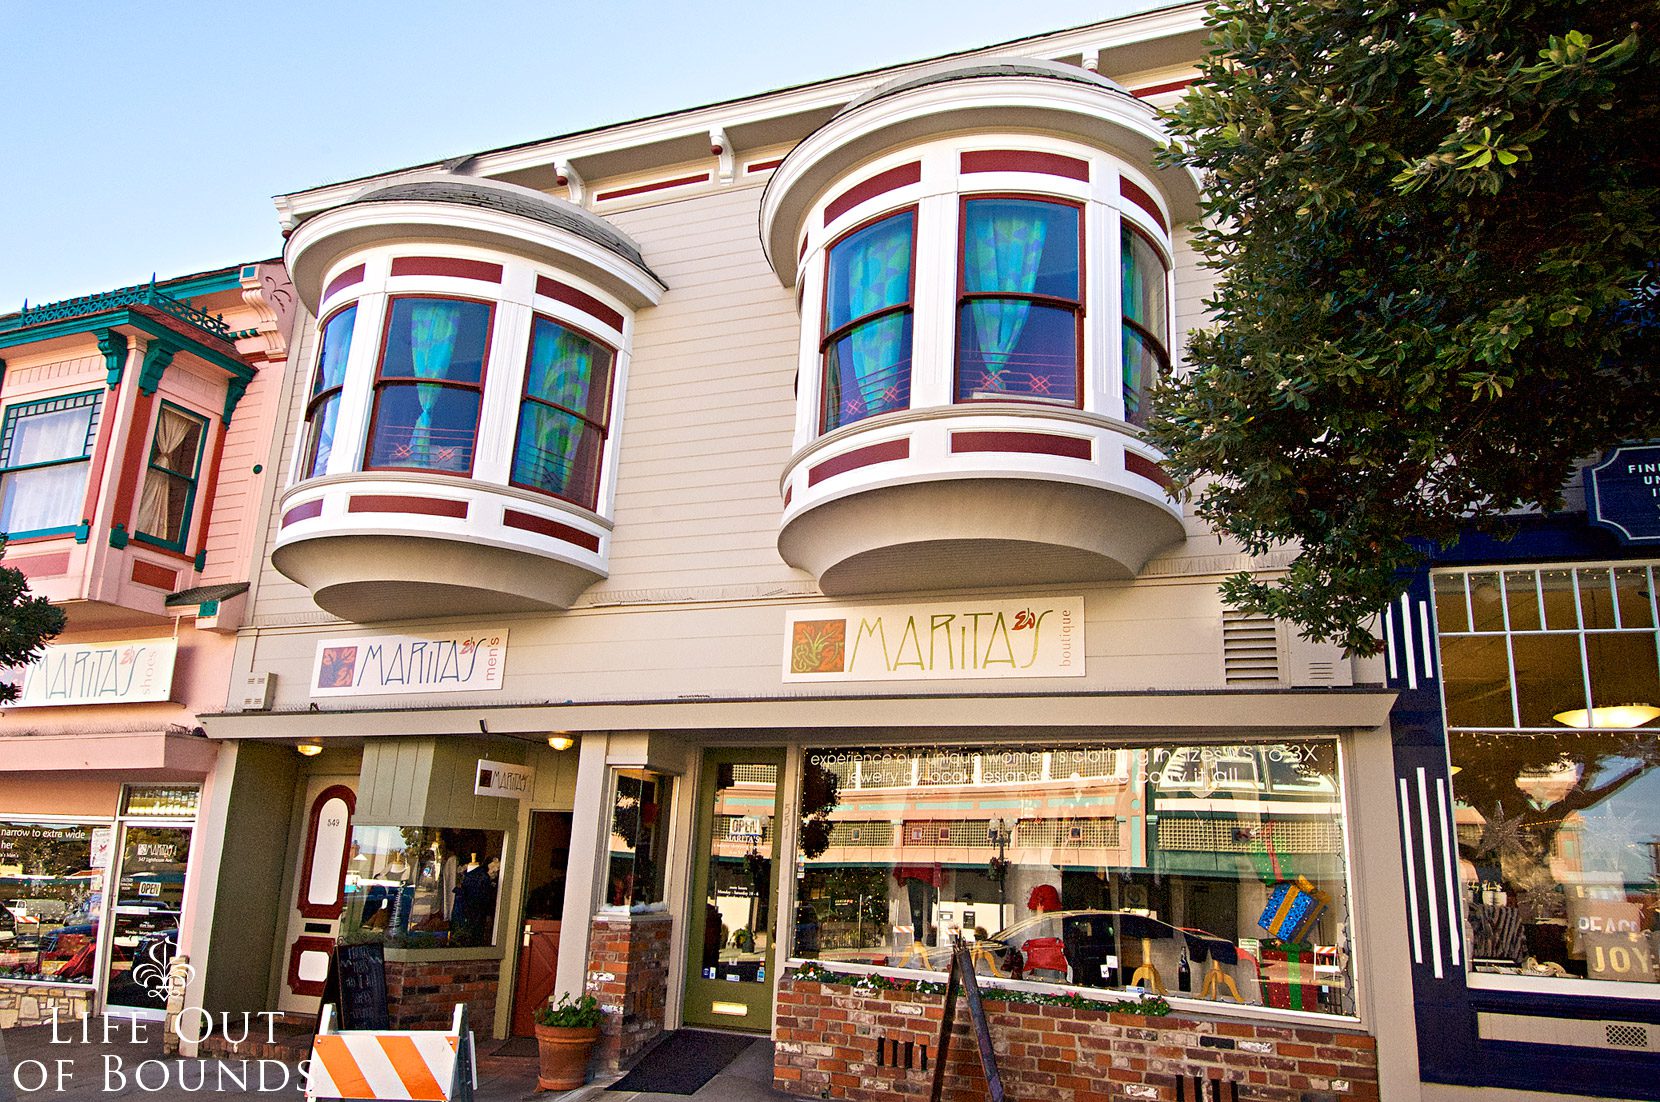 Colorful-Victorian-buildings-in-downtown-Pacific-Grove-California